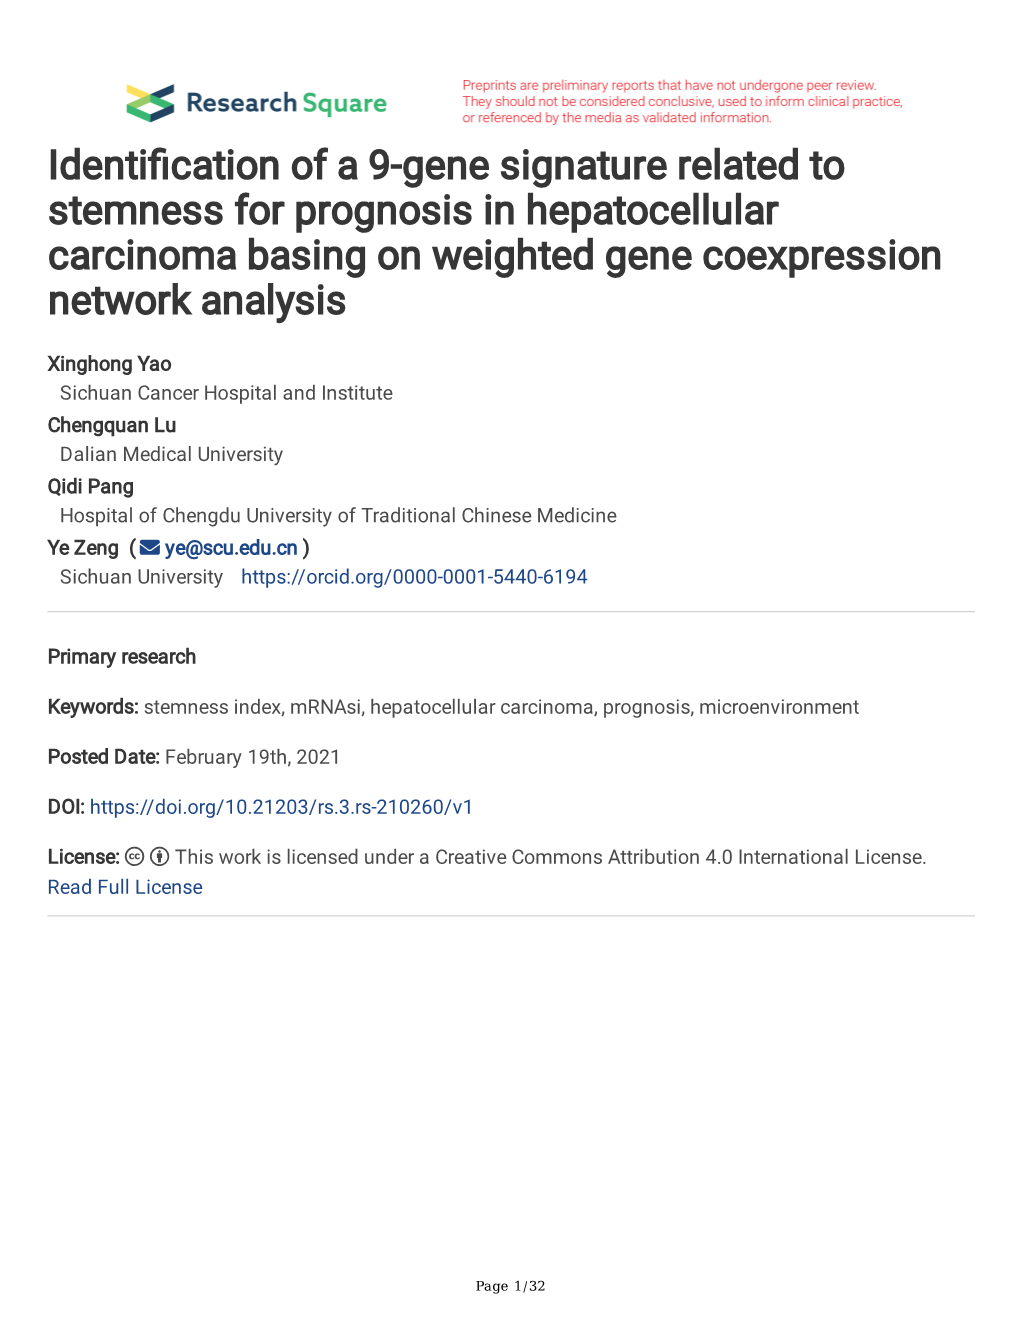 Identification of a 9-Gene Signature Related to Stemness for Prognosis In